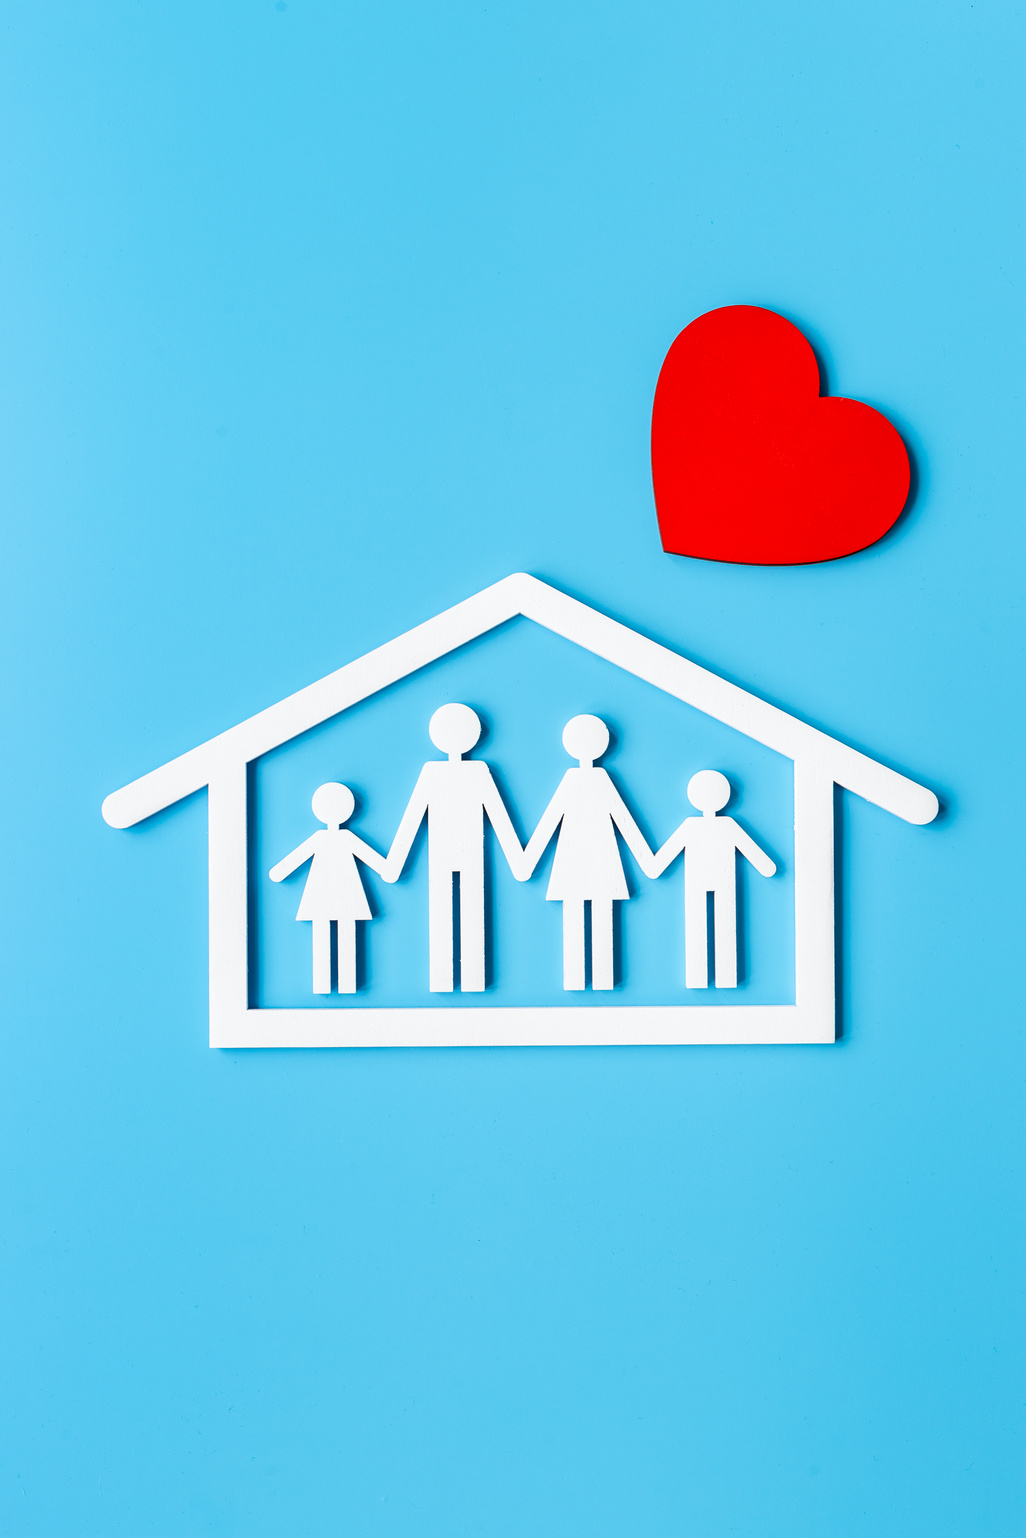 Family figure in house with heart. Happy family, protection and insurance concept